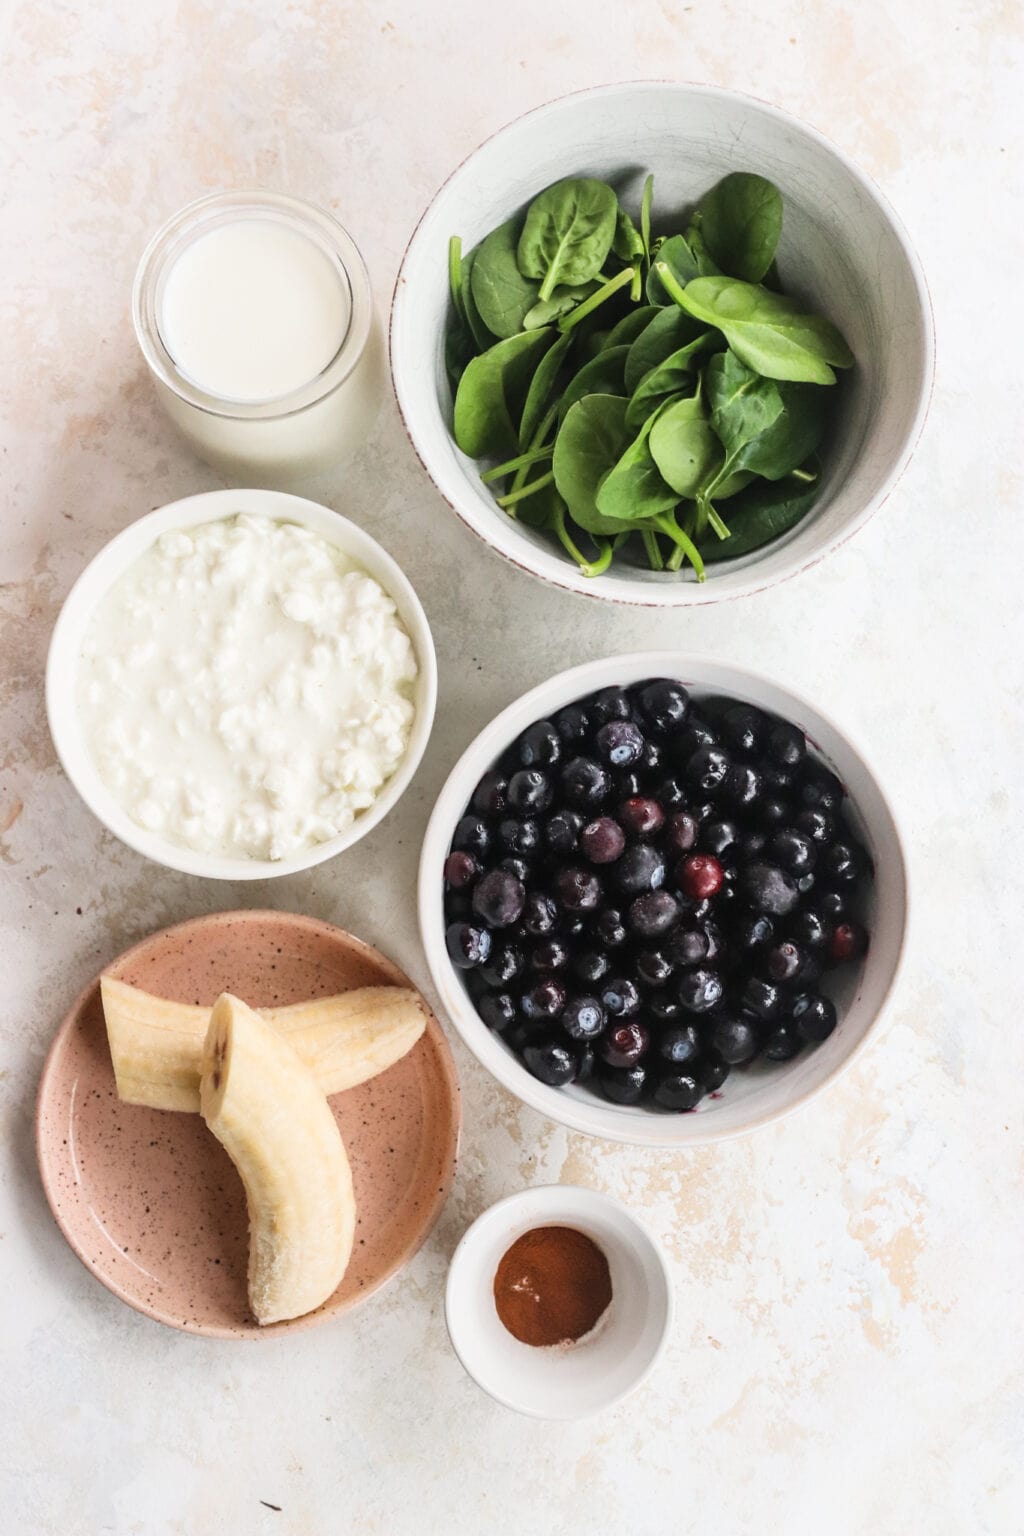 Ingredients for High Protein Blueberry Breakfast Smoothie in small bowls, including blueberries, banana, cottage cheese, milk, cinnamon, spinach, chia seeds, hemp hearts